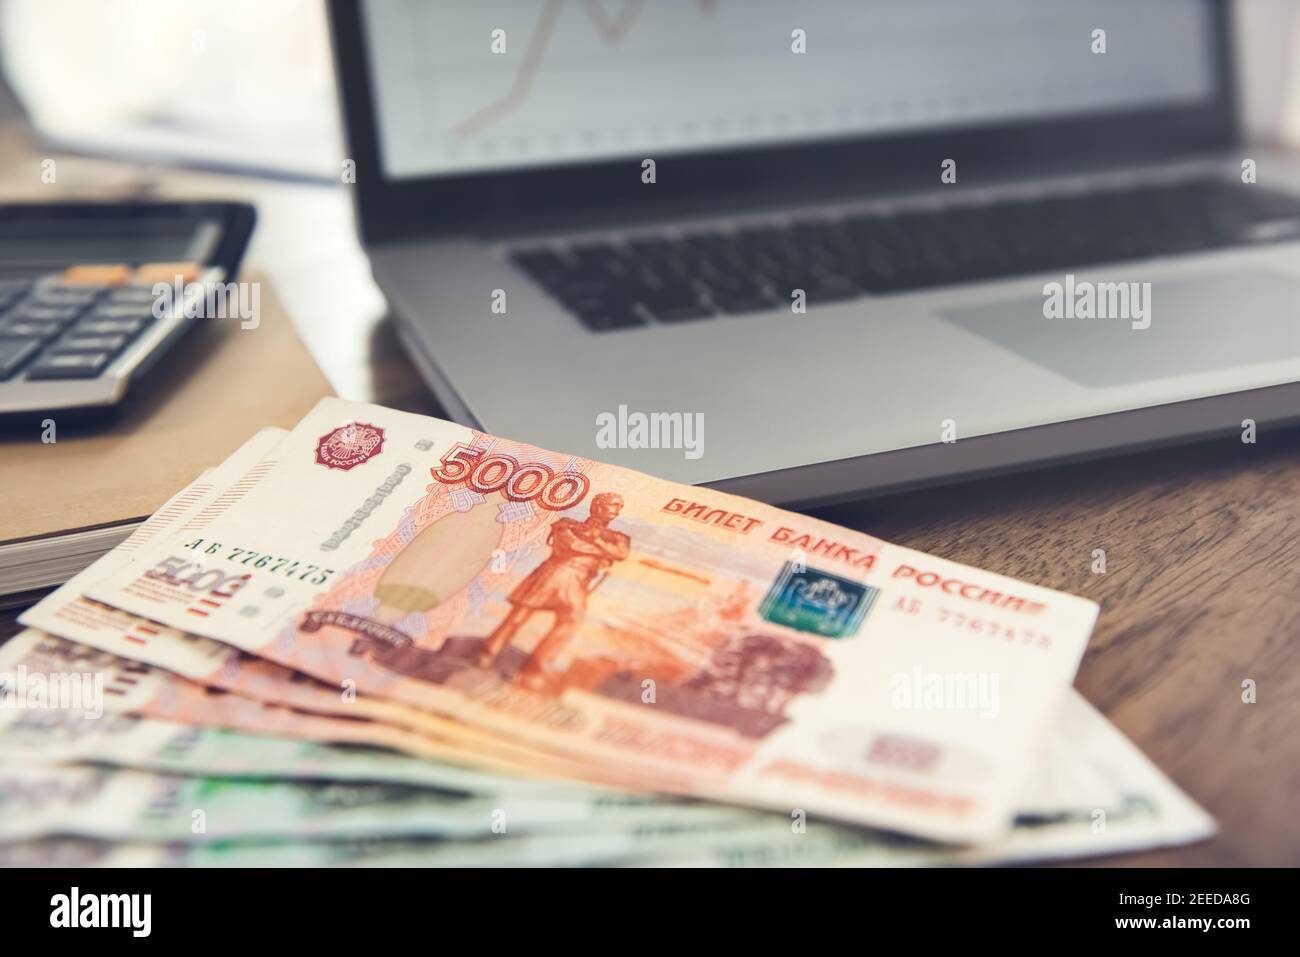 Russian Ruble money banknotes on wooden desk with a laptop computer and a calculator - online financial planning and investment concepts Stock Photo